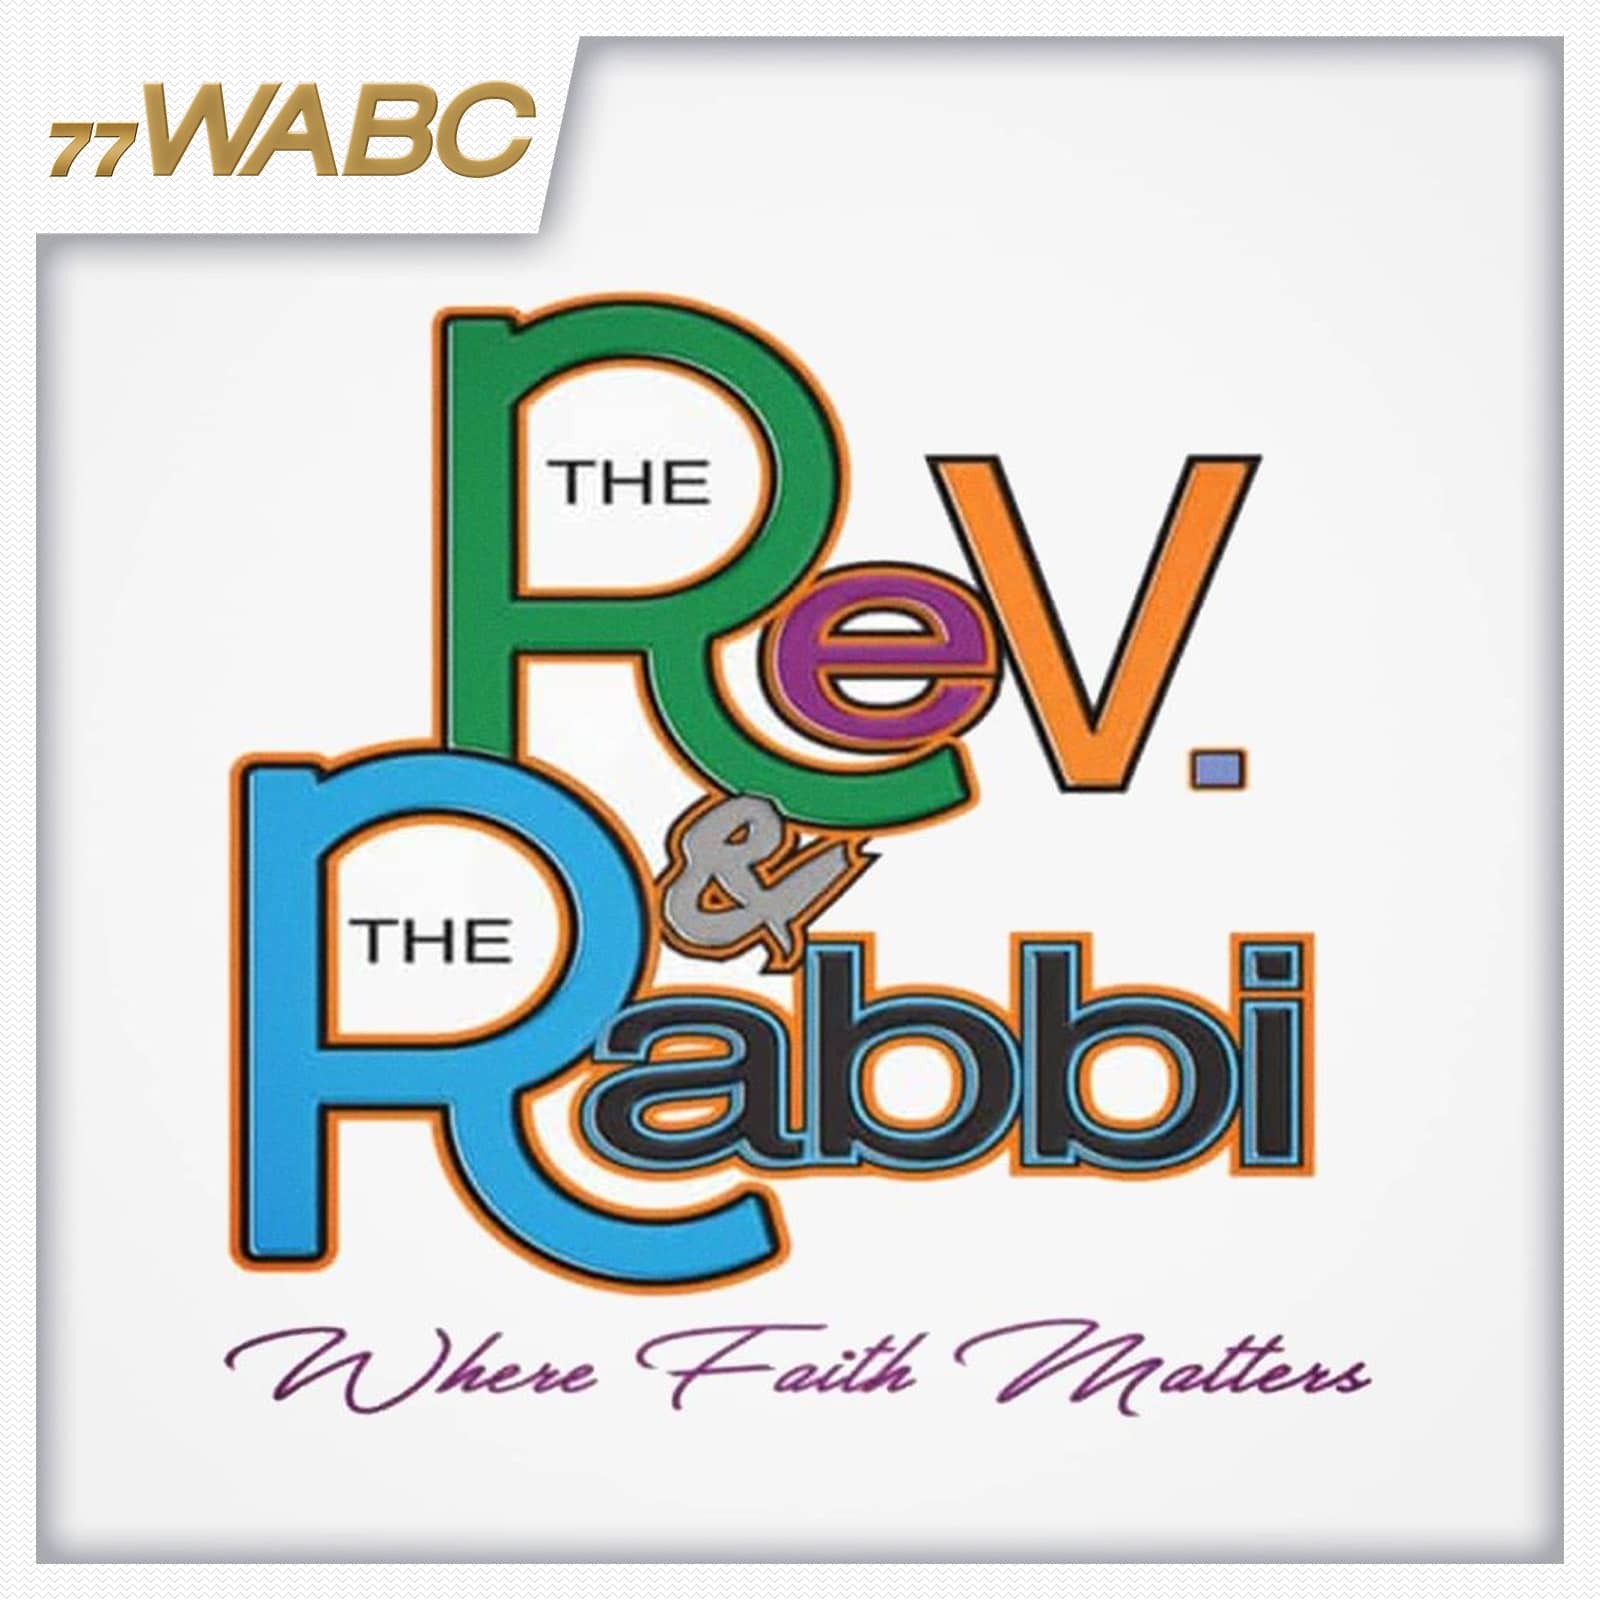 The Rev and The Rabbi Podcast